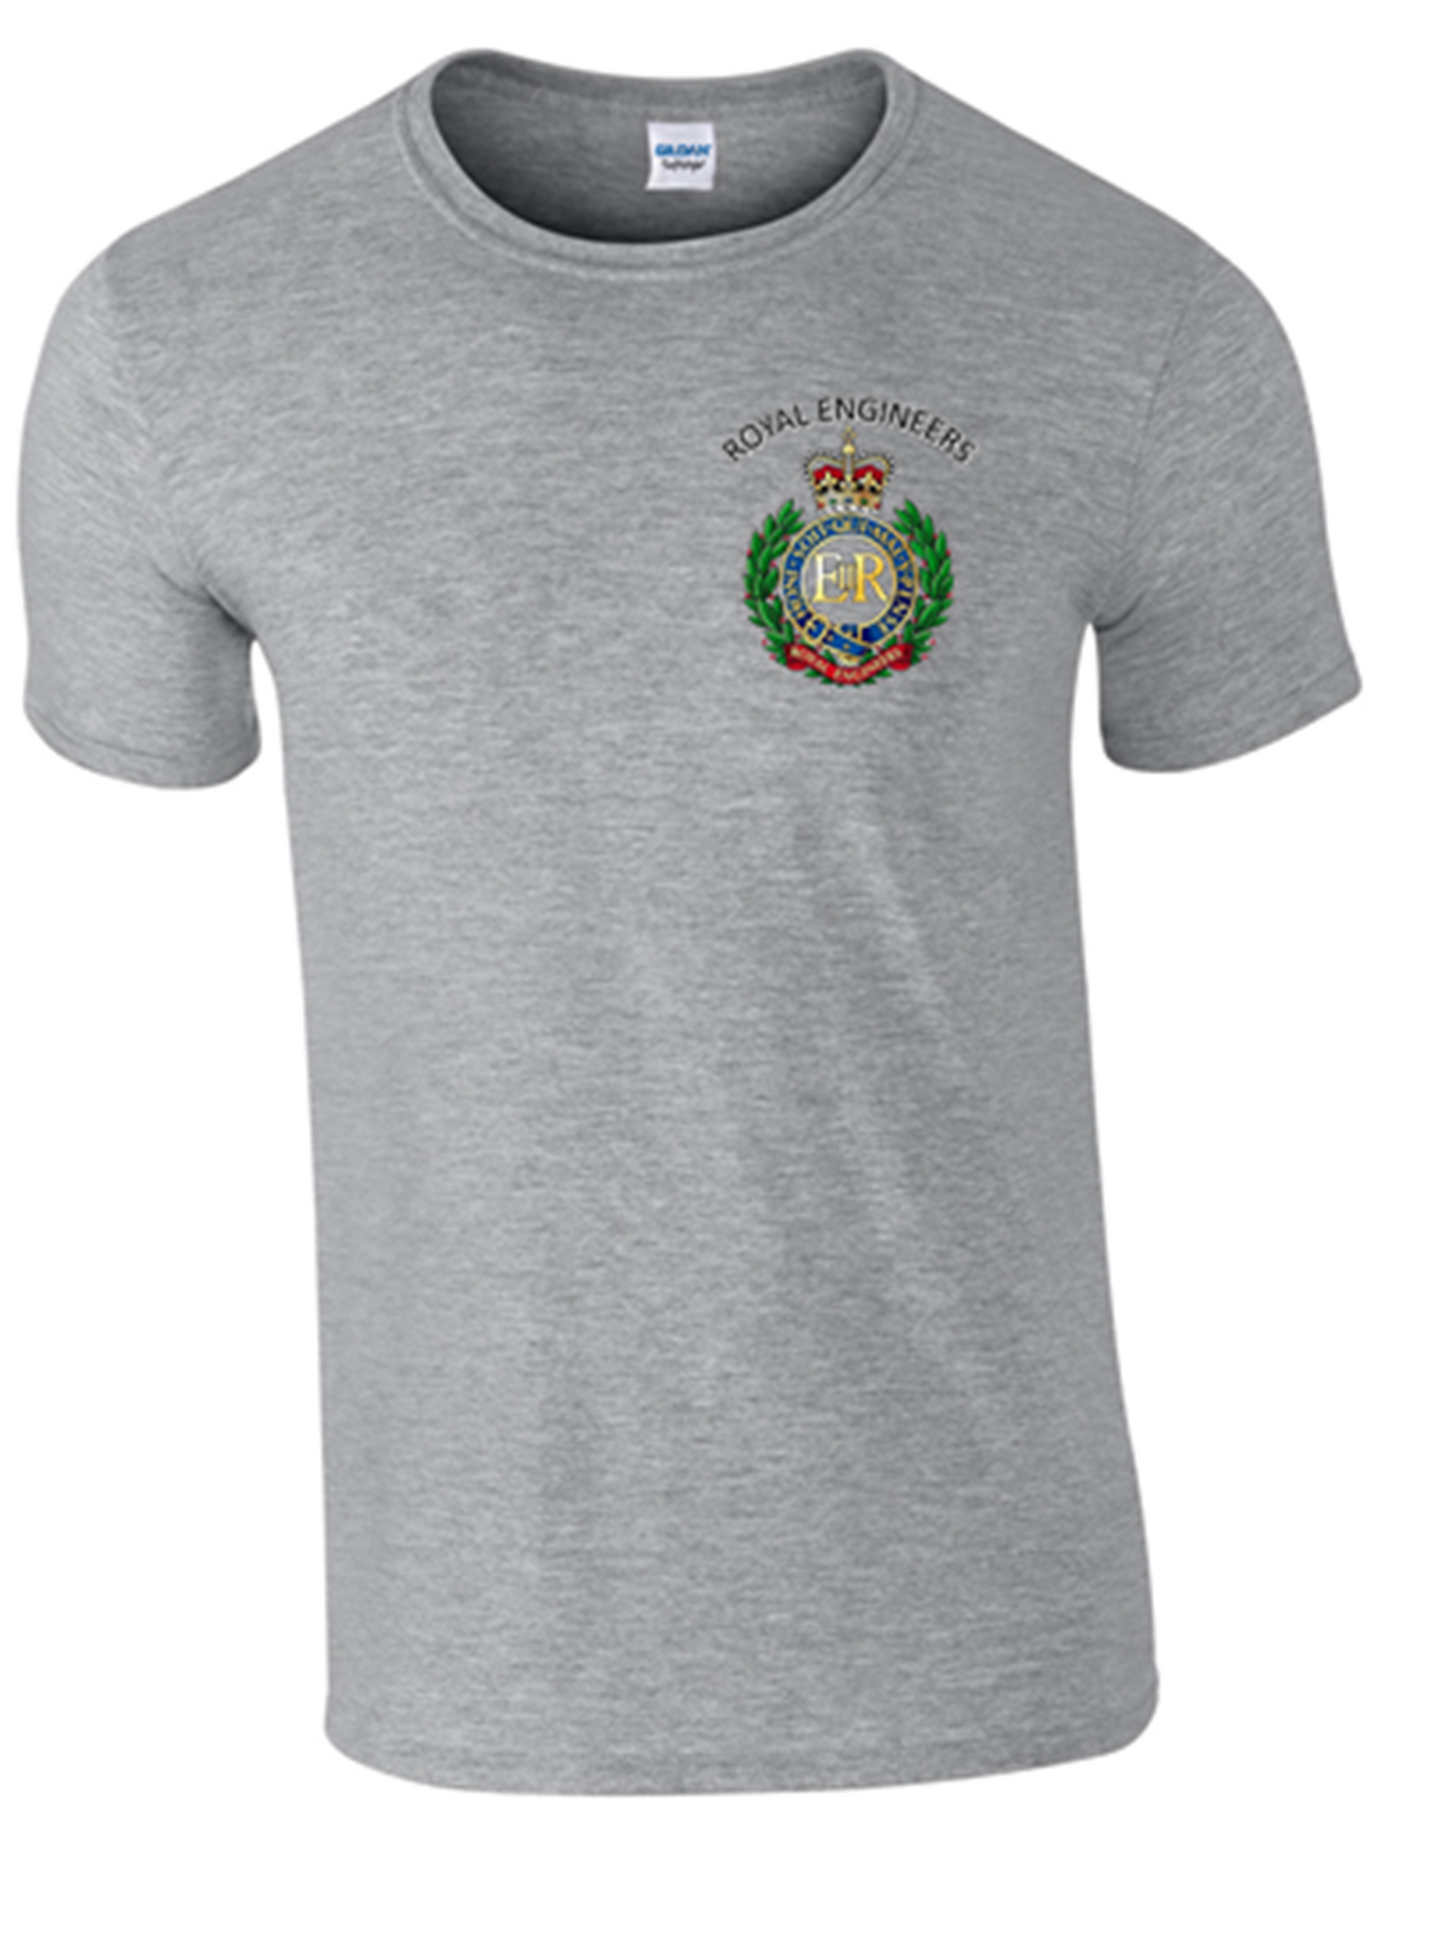 Ministry of Defence T-Shirt with Royal Engineers Front Only - Army 1157 kit S / GRAY Army 1157 Kit Veterans Owned Business